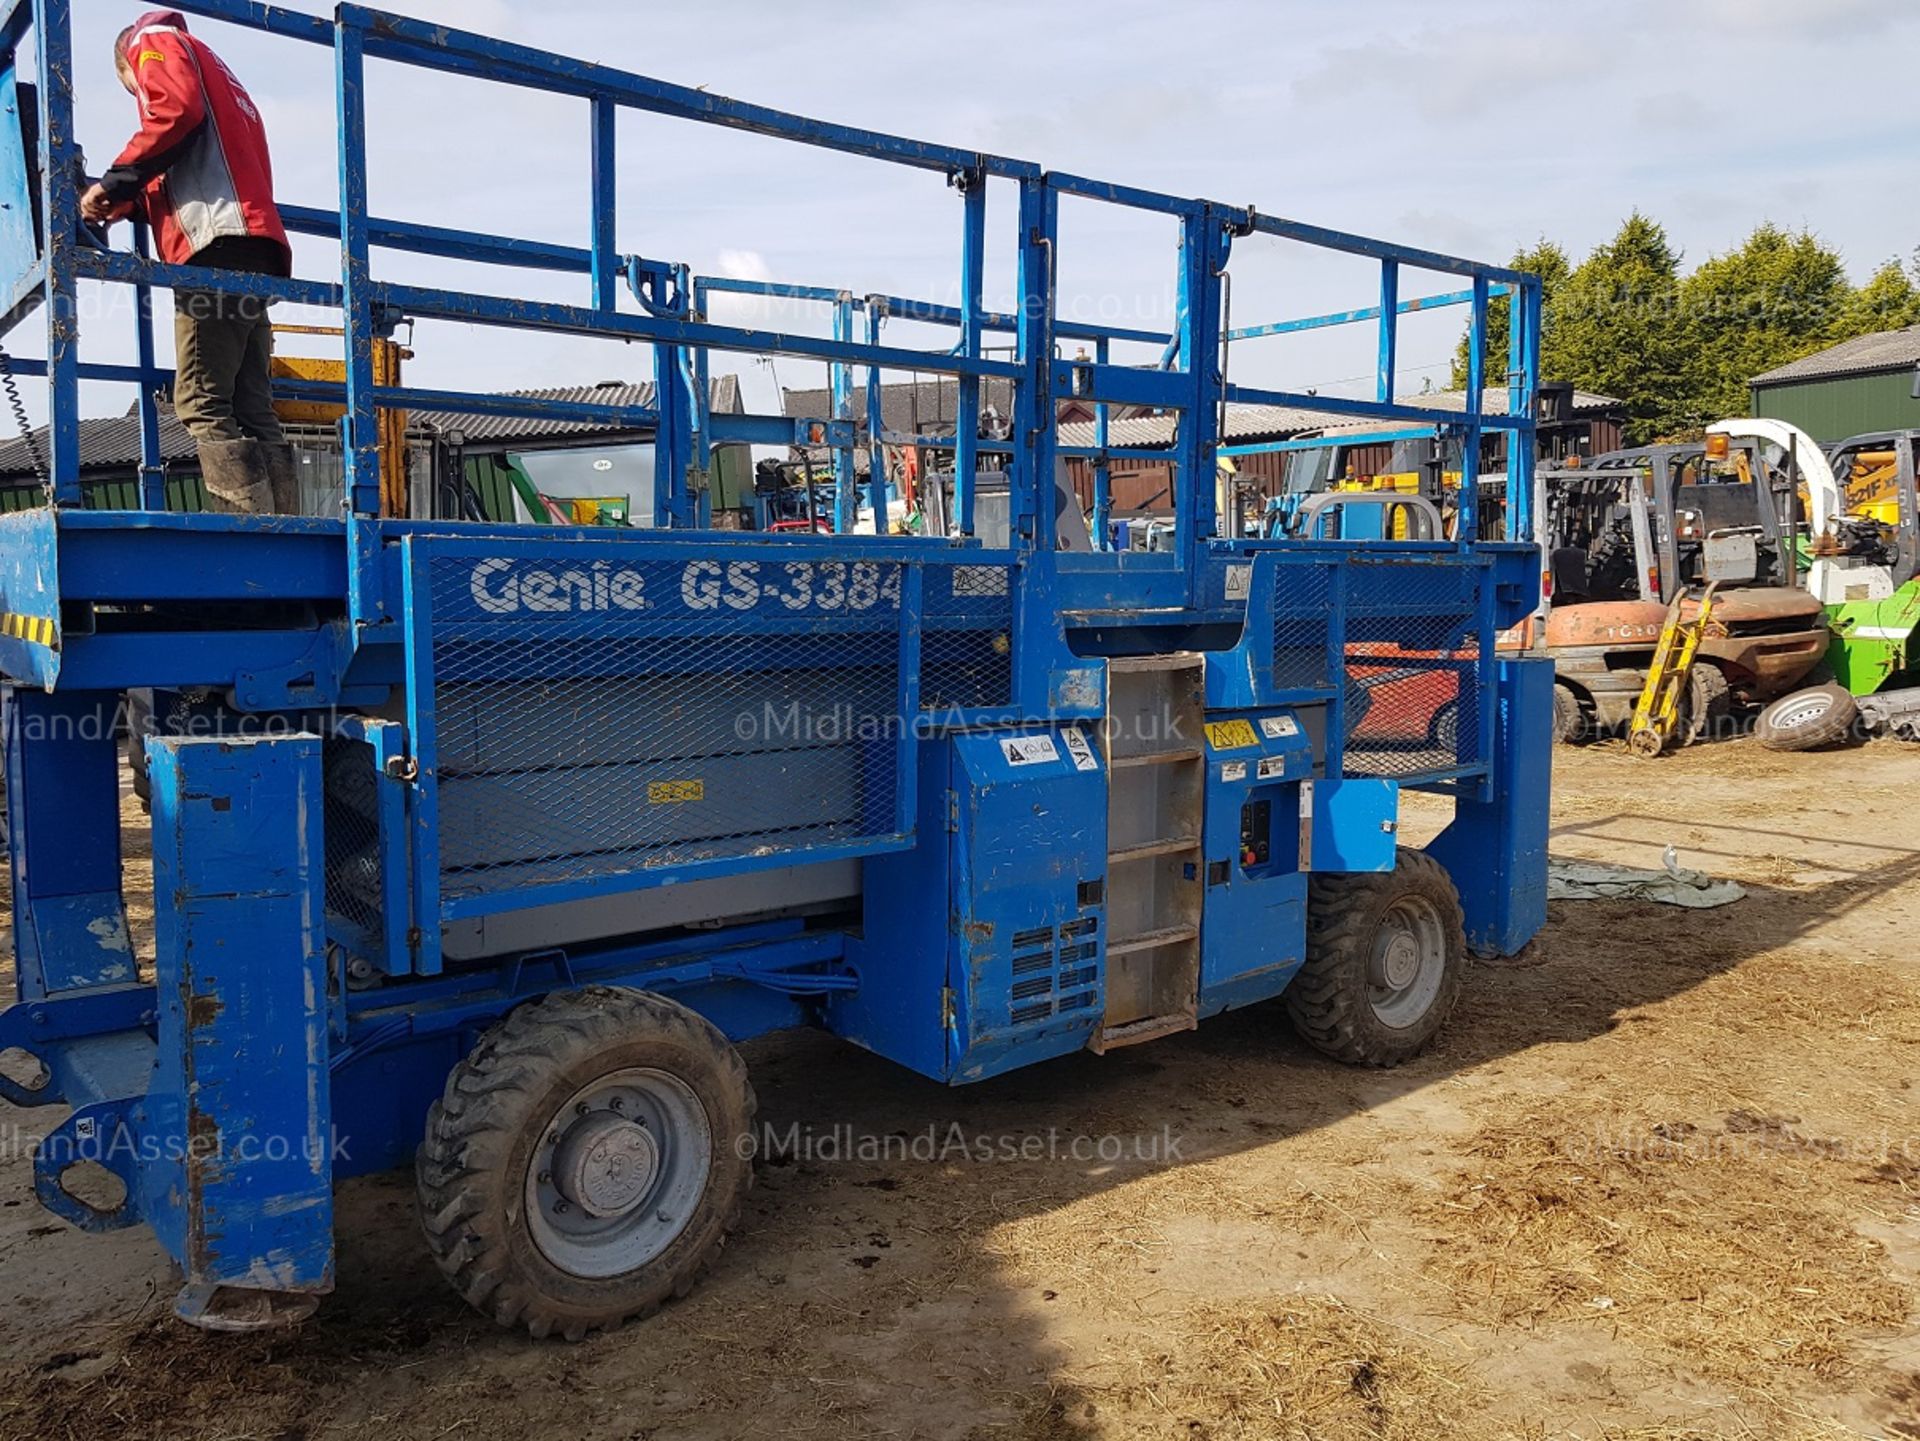 2004 GENIE GS-3384 ROUGH TERRAIN SCISSOR LIFT AUTO LEVELLING 4WD. STARTS, DRIVES AND LIFTS - Image 3 of 10